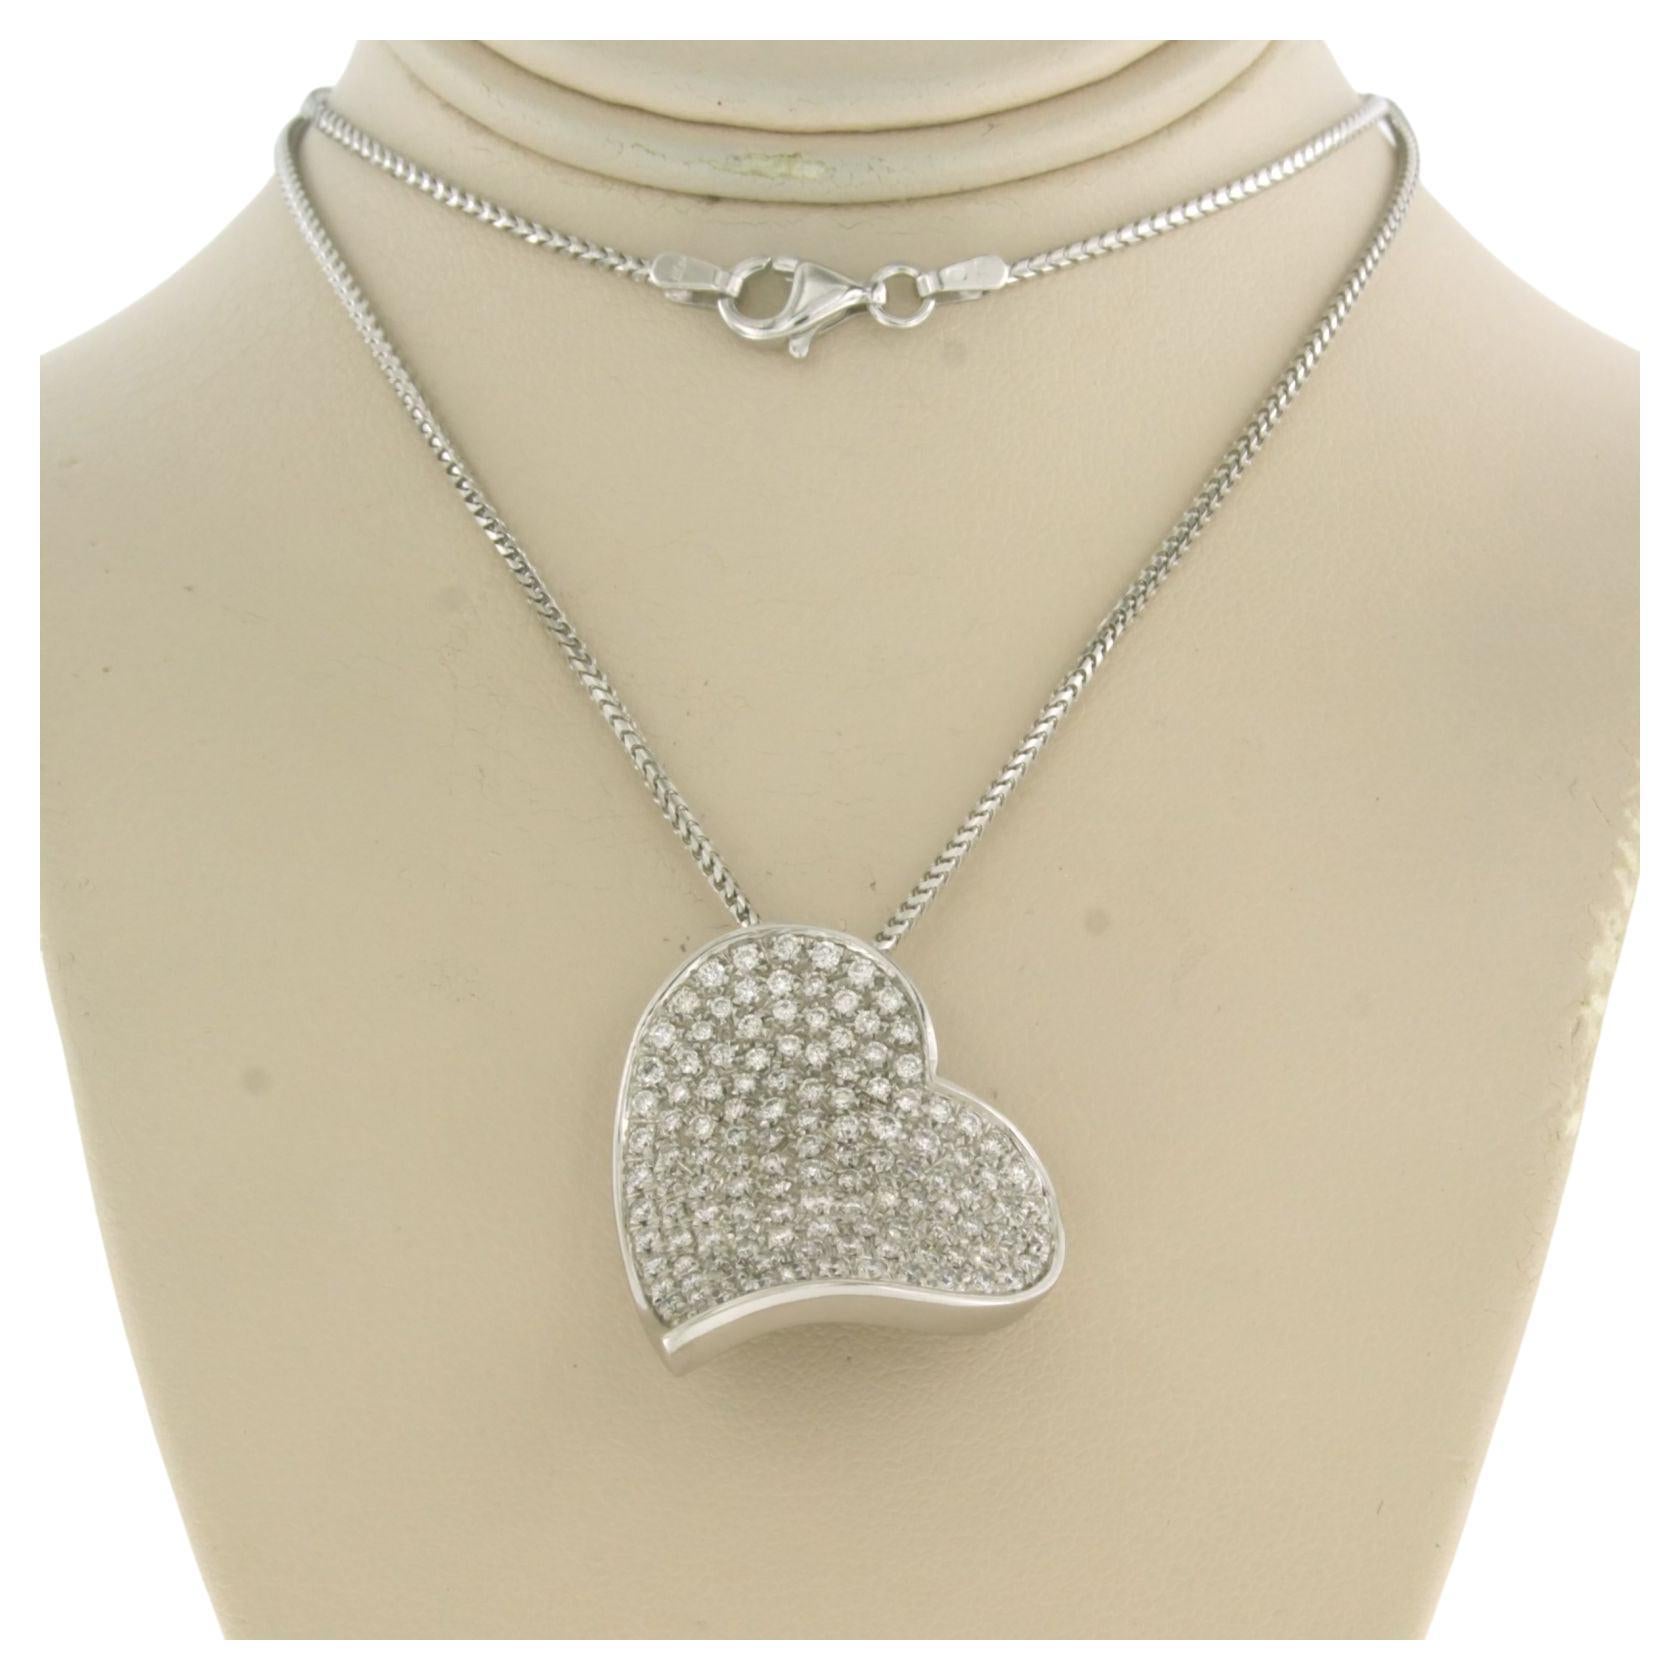 Chain and pendant in shape of a heart set with diamonds 18k white gold